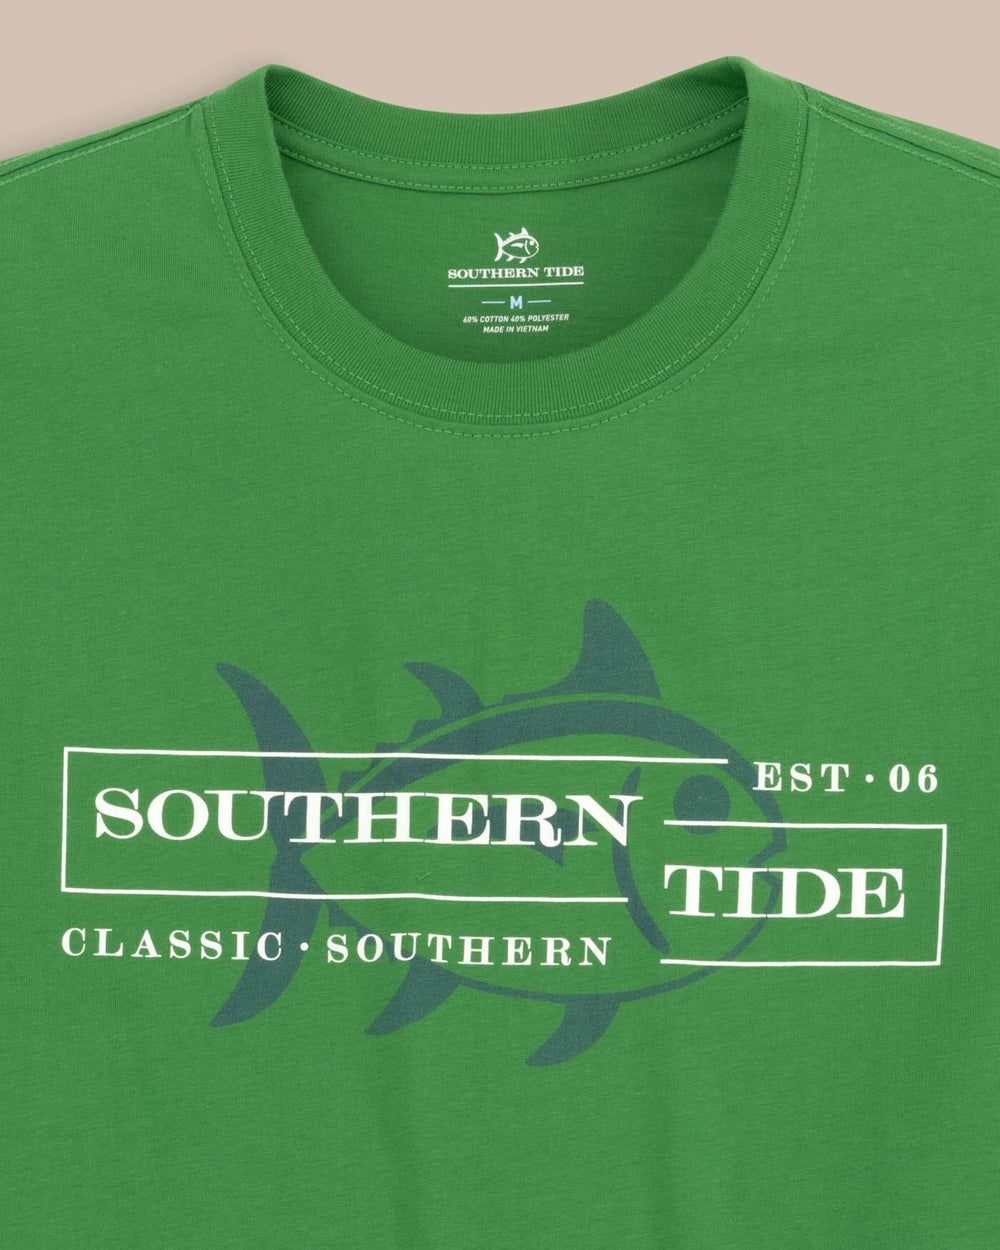 The detail view of the Southern Tide Classic Southern Heather Short Sleeve T-Shirt by Southern Tide - Heather Foliage Green